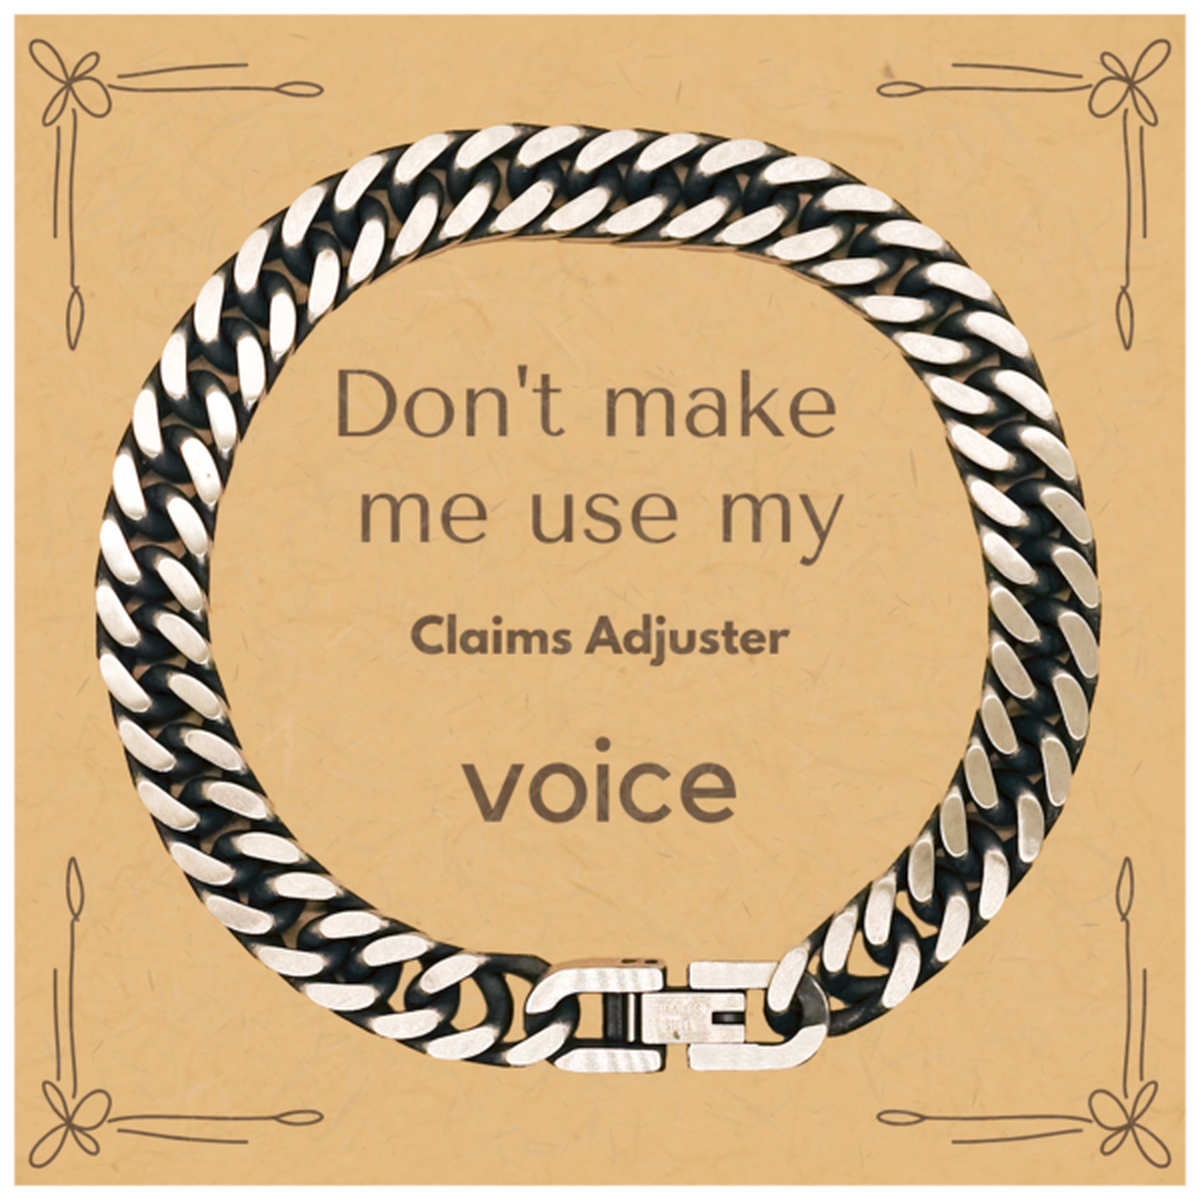 Don't make me use my Claims Adjuster voice, Sarcasm Claims Adjuster Card Gifts, Christmas Claims Adjuster Cuban Link Chain Bracelet Birthday Unique Gifts For Claims Adjuster Coworkers, Men, Women, Colleague, Friends